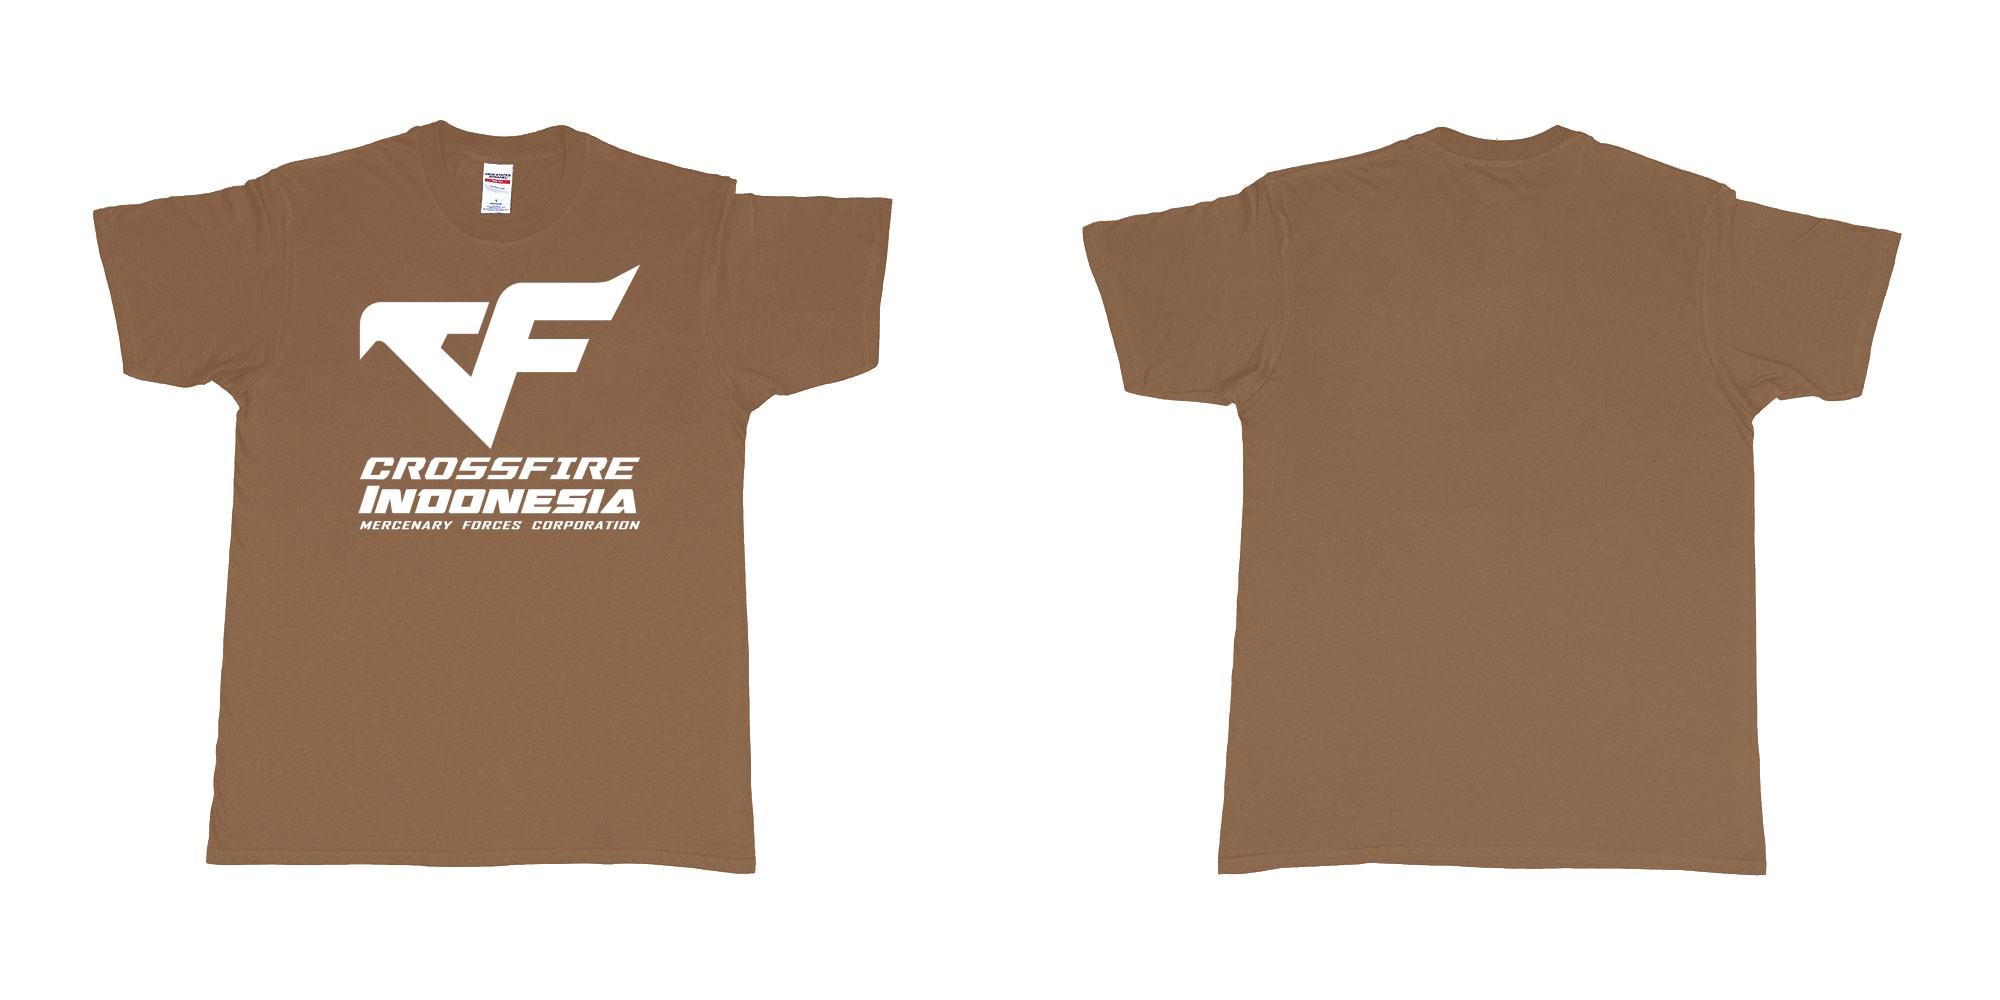 Custom tshirt design crossfire indonesia cfindo in fabric color chestnut choice your own text made in Bali by The Pirate Way